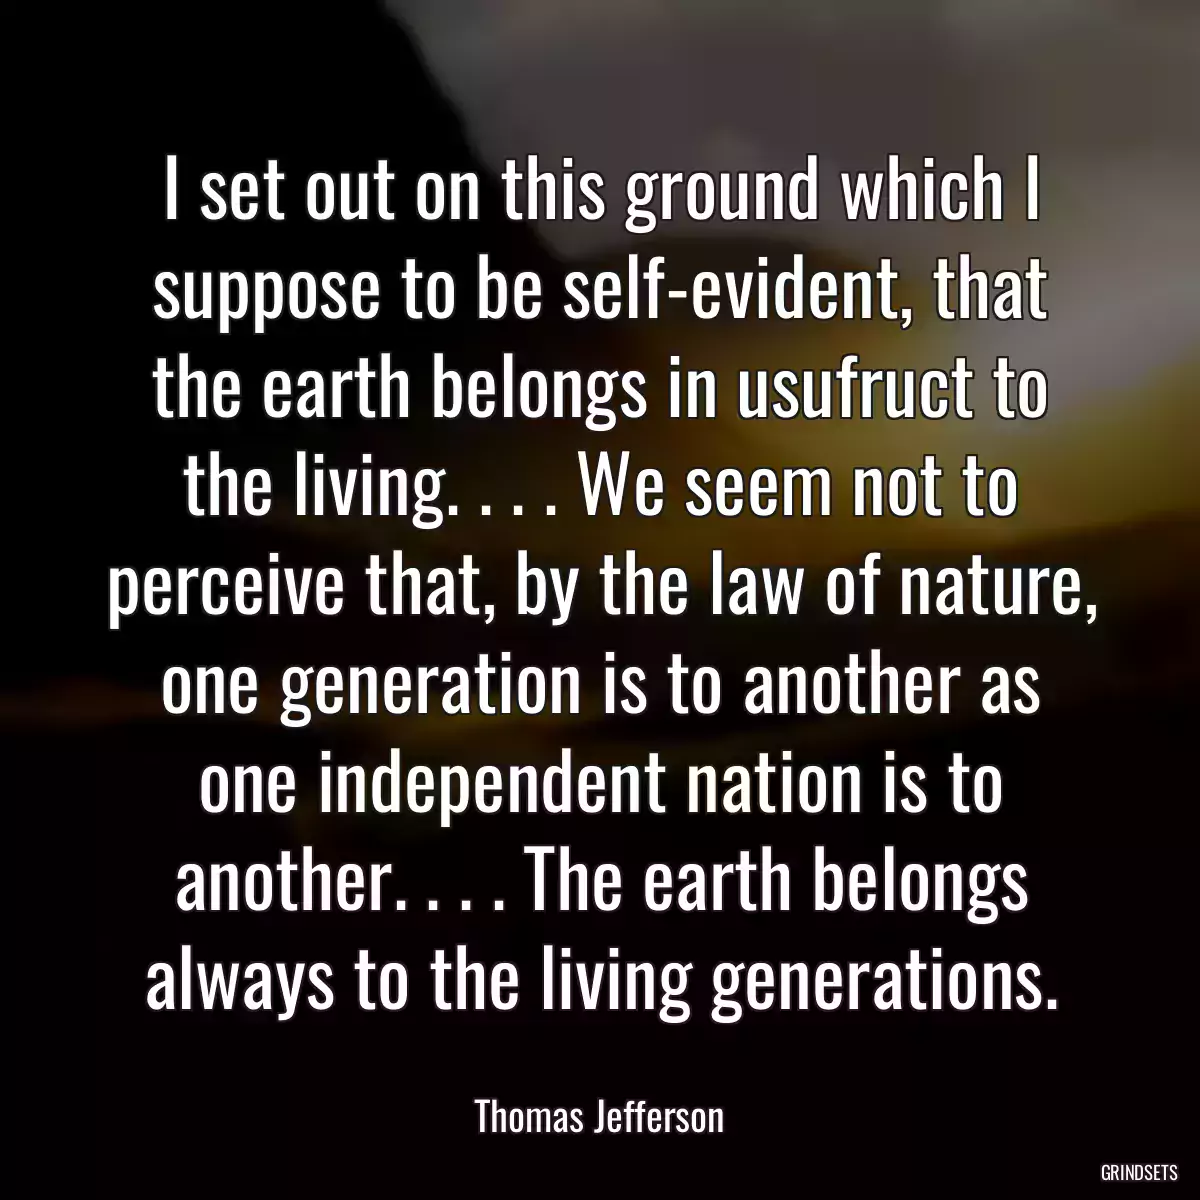 I set out on this ground which I suppose to be self-evident, that the earth belongs in usufruct to the living. . . . We seem not to perceive that, by the law of nature, one generation is to another as one independent nation is to another. . . . The earth belongs always to the living generations.